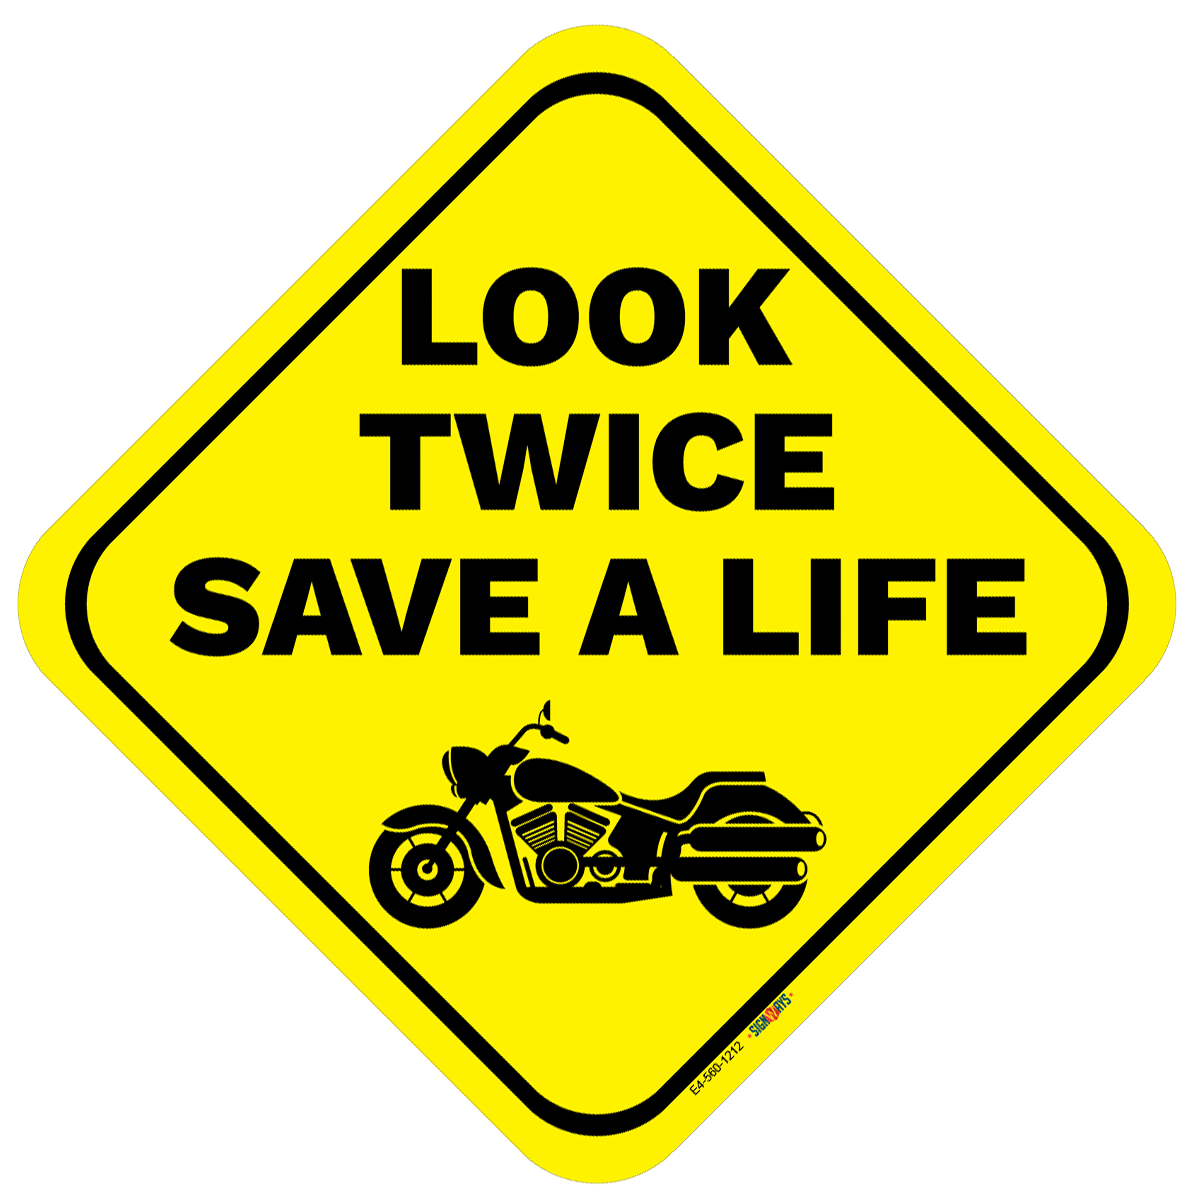 Look Twice, Save A Life (Cruiser Motorcycle Image) Sign